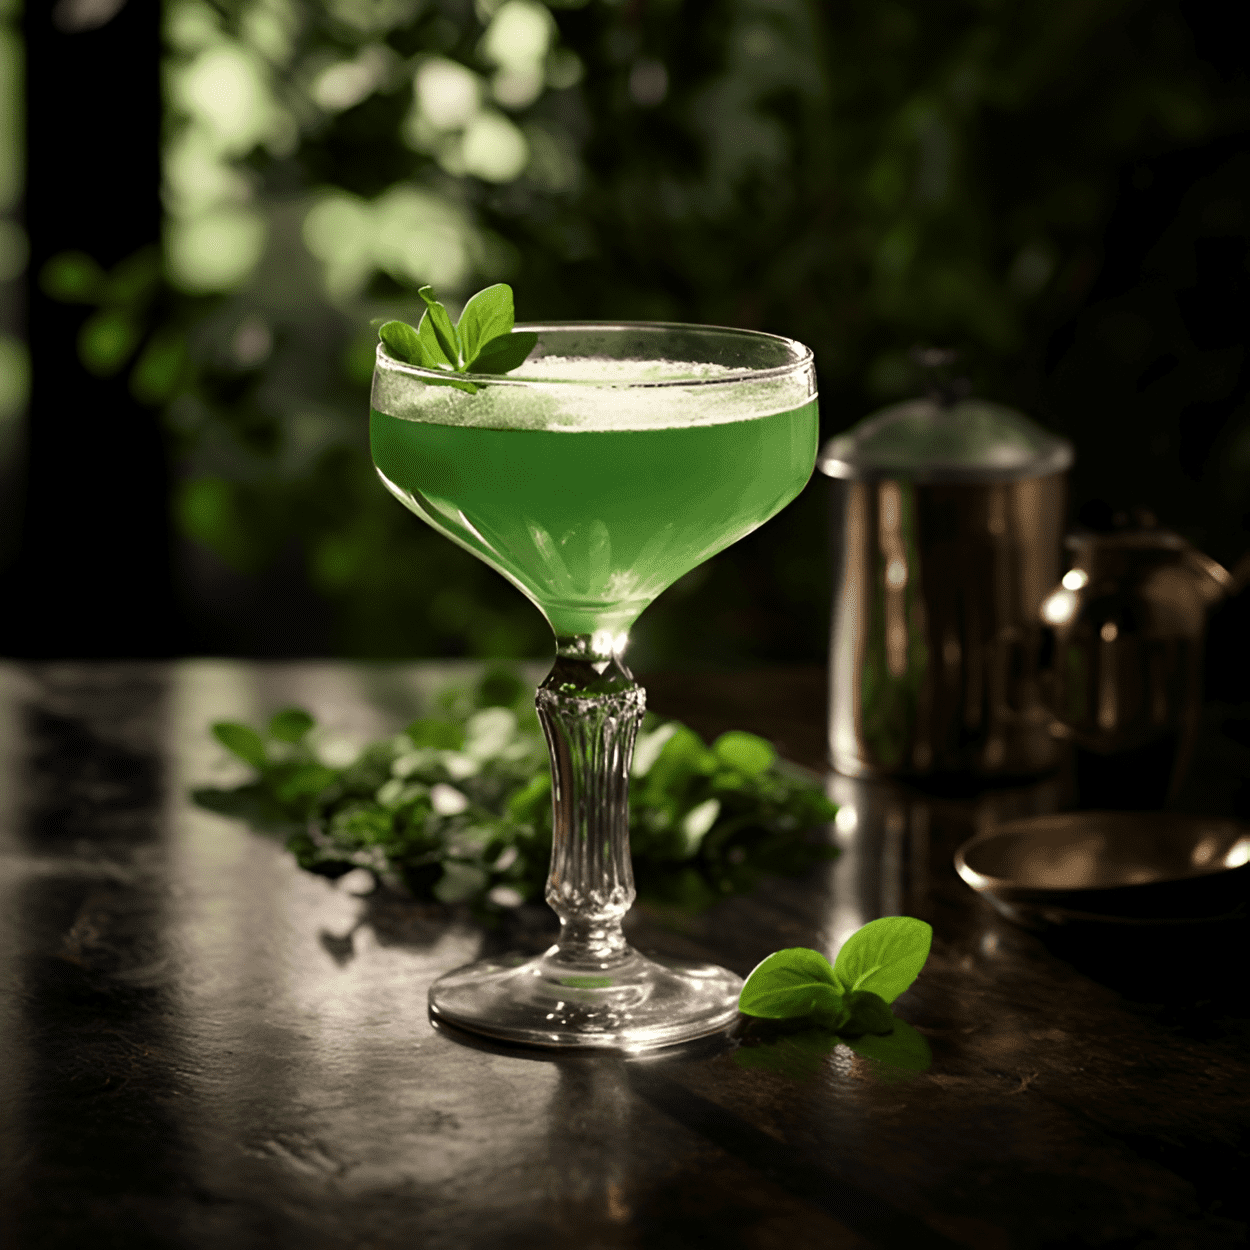 The Emerald Isle cocktail is a refreshing and well-balanced drink with a slightly sweet, herbal, and citrusy flavor profile. The gin provides a strong, juniper-forward base, while the green crème de menthe adds a cooling, minty sweetness. The bitters and lemon juice bring a touch of bitterness and acidity to round out the taste.